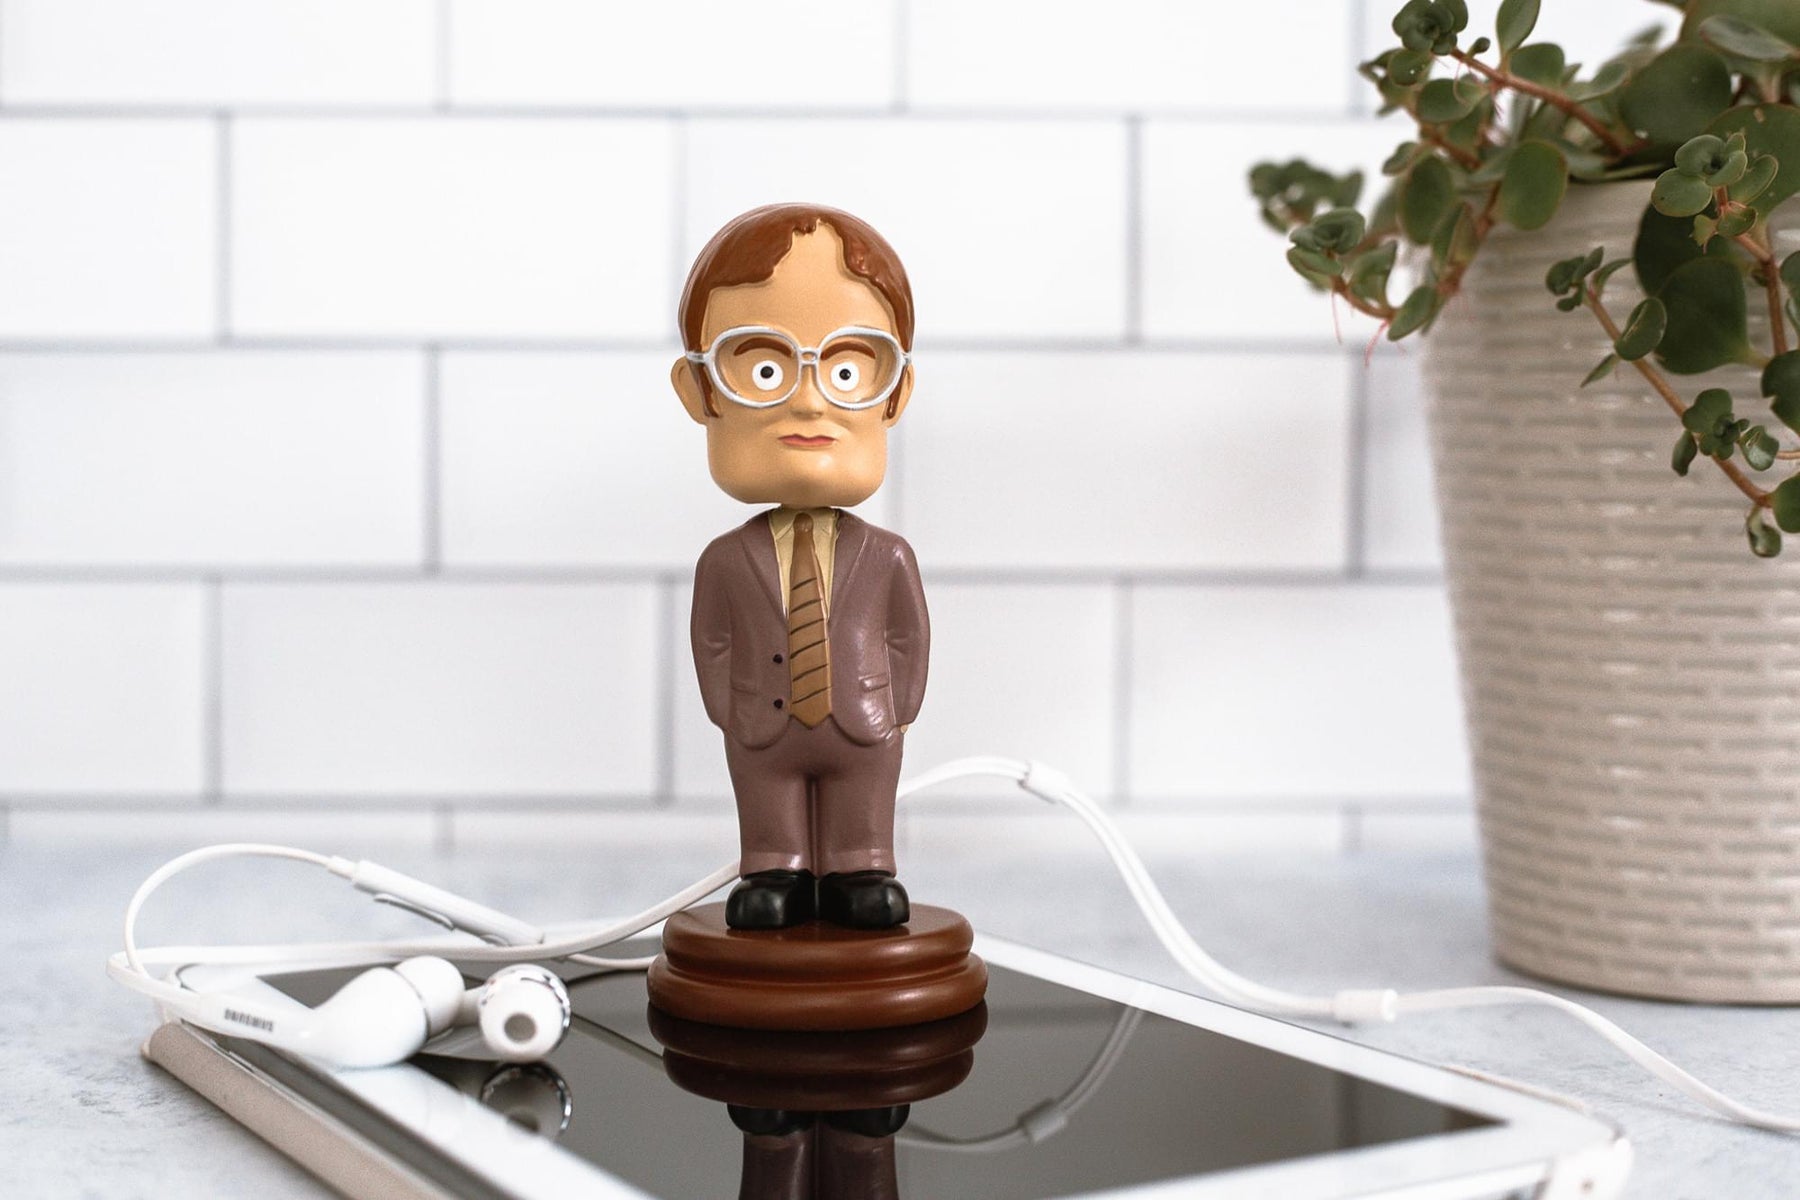 The Office Dwight Schrute Bobblehead Collectible Figure | Stands 5.5 Inches Tall